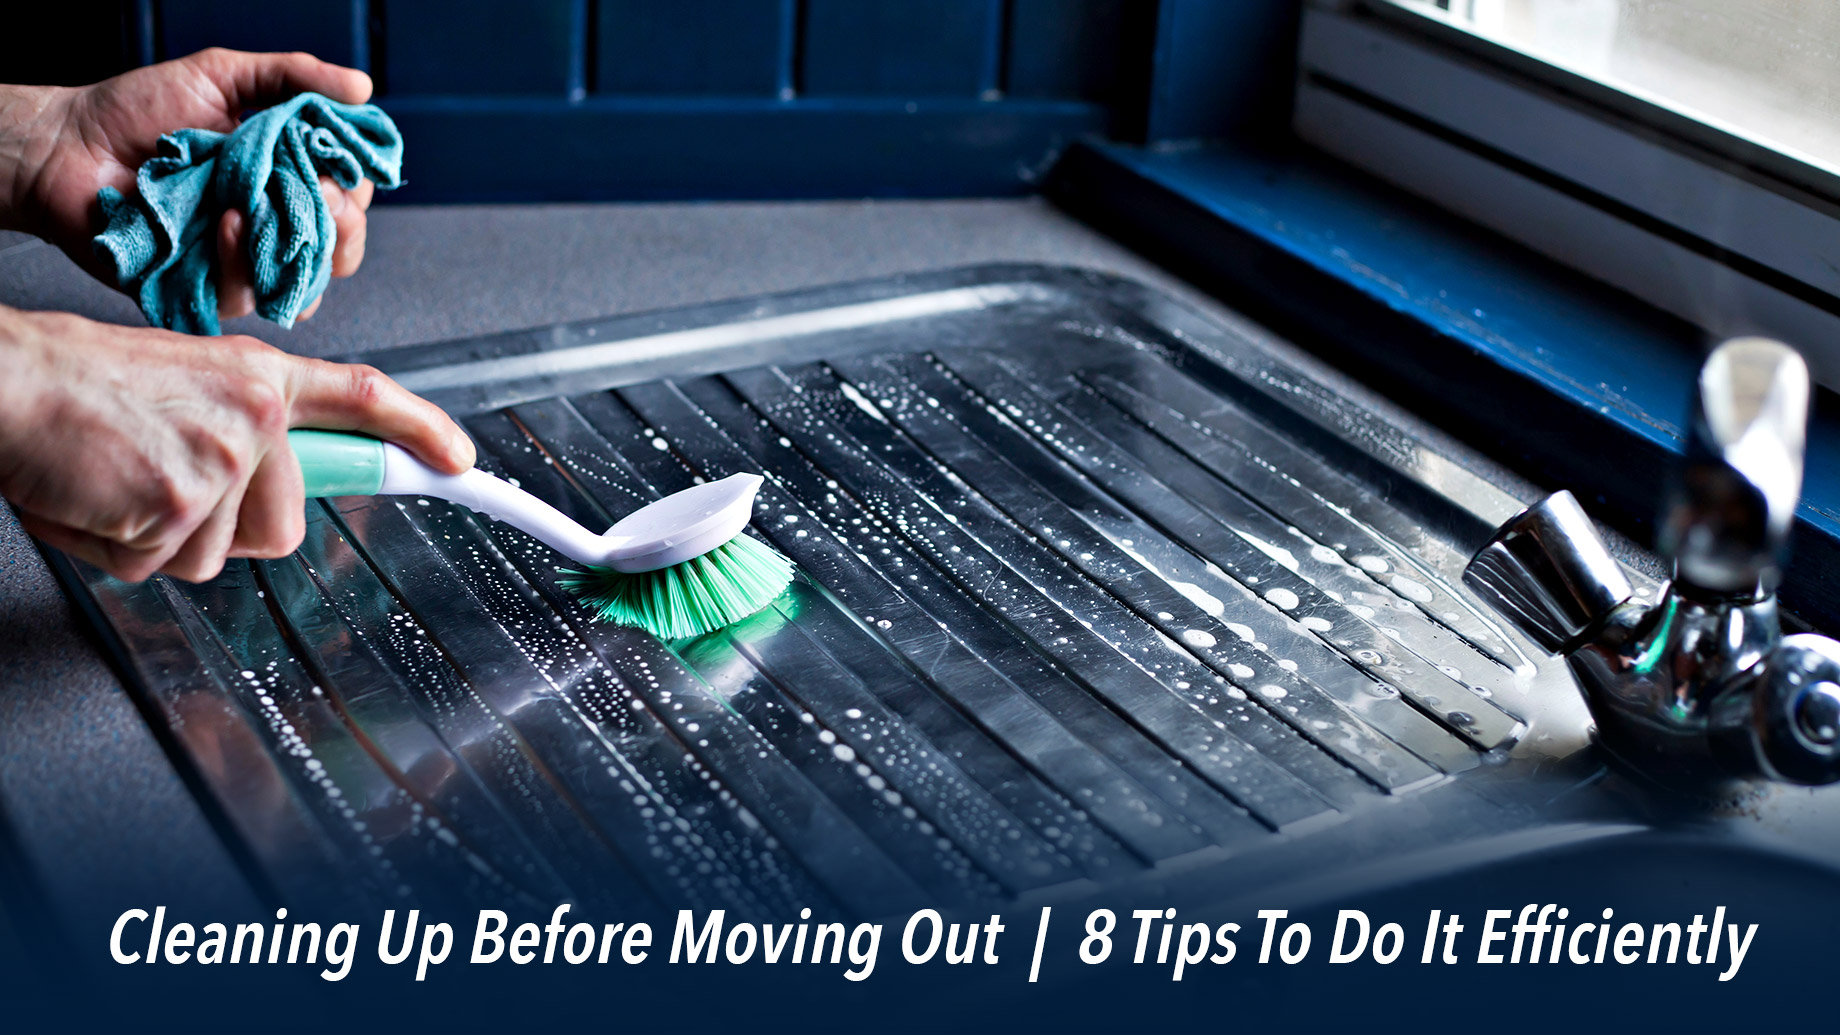 Cleaning Up Before Moving Out - 8 Tips To Do It Efficiently